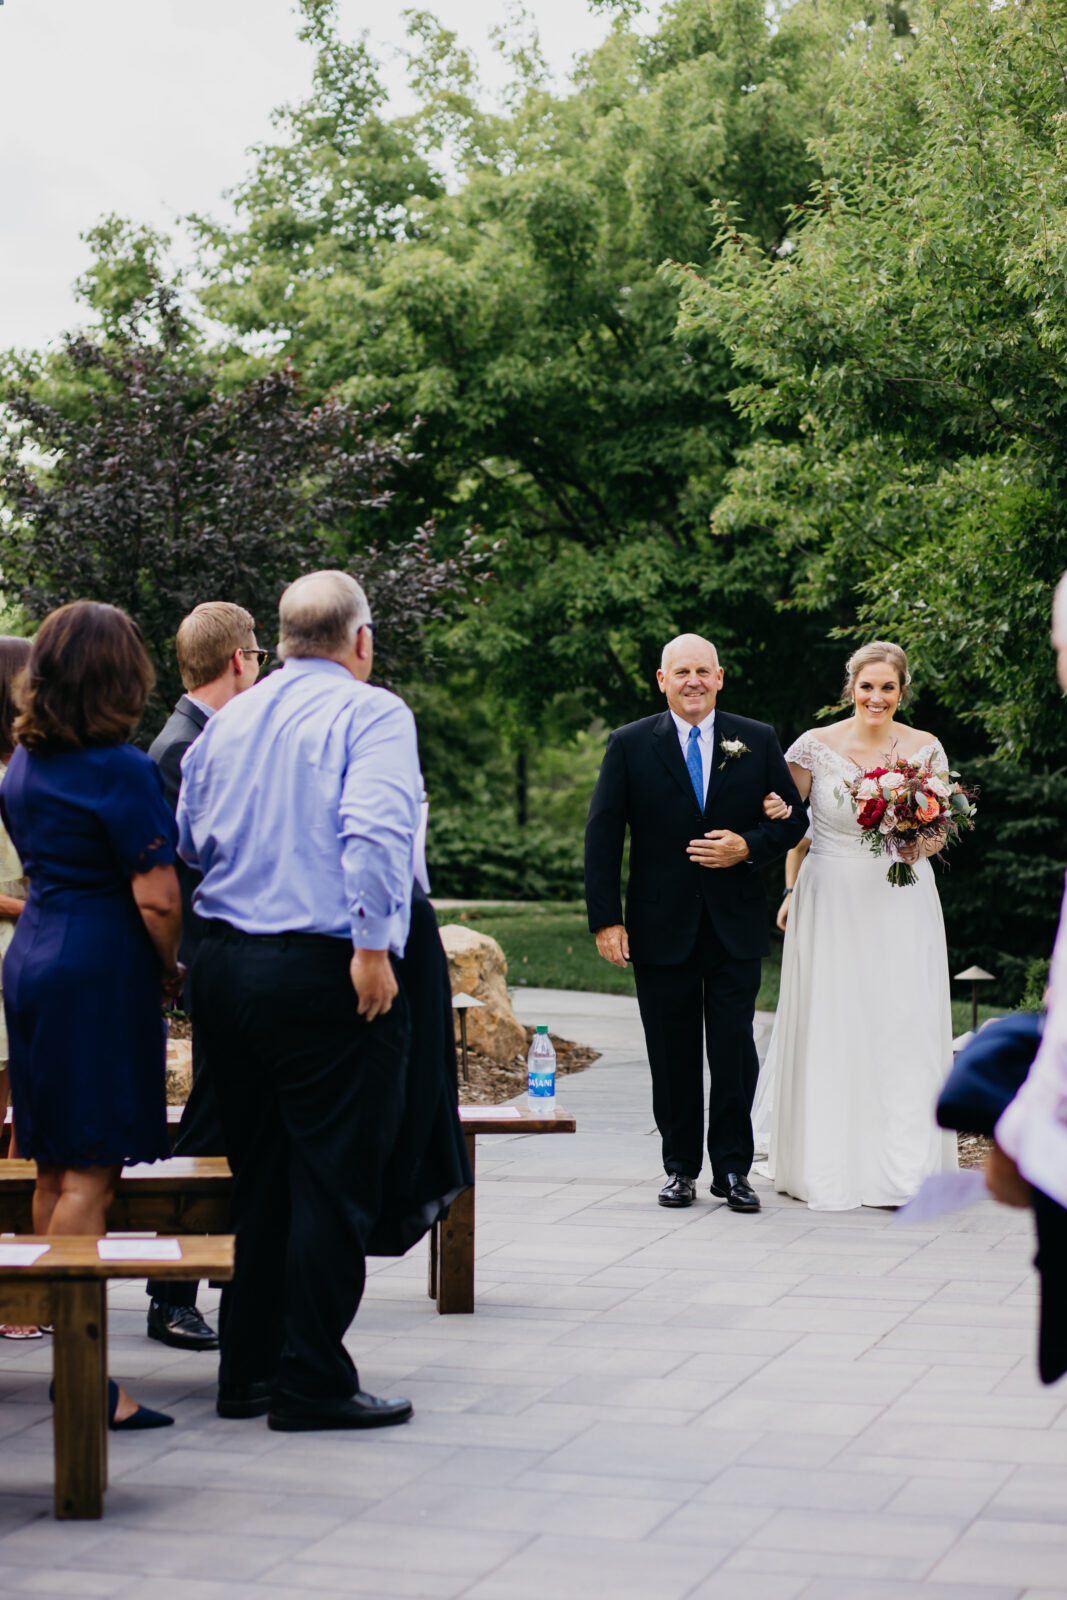 A photo of the bride walking down the aisle with her father